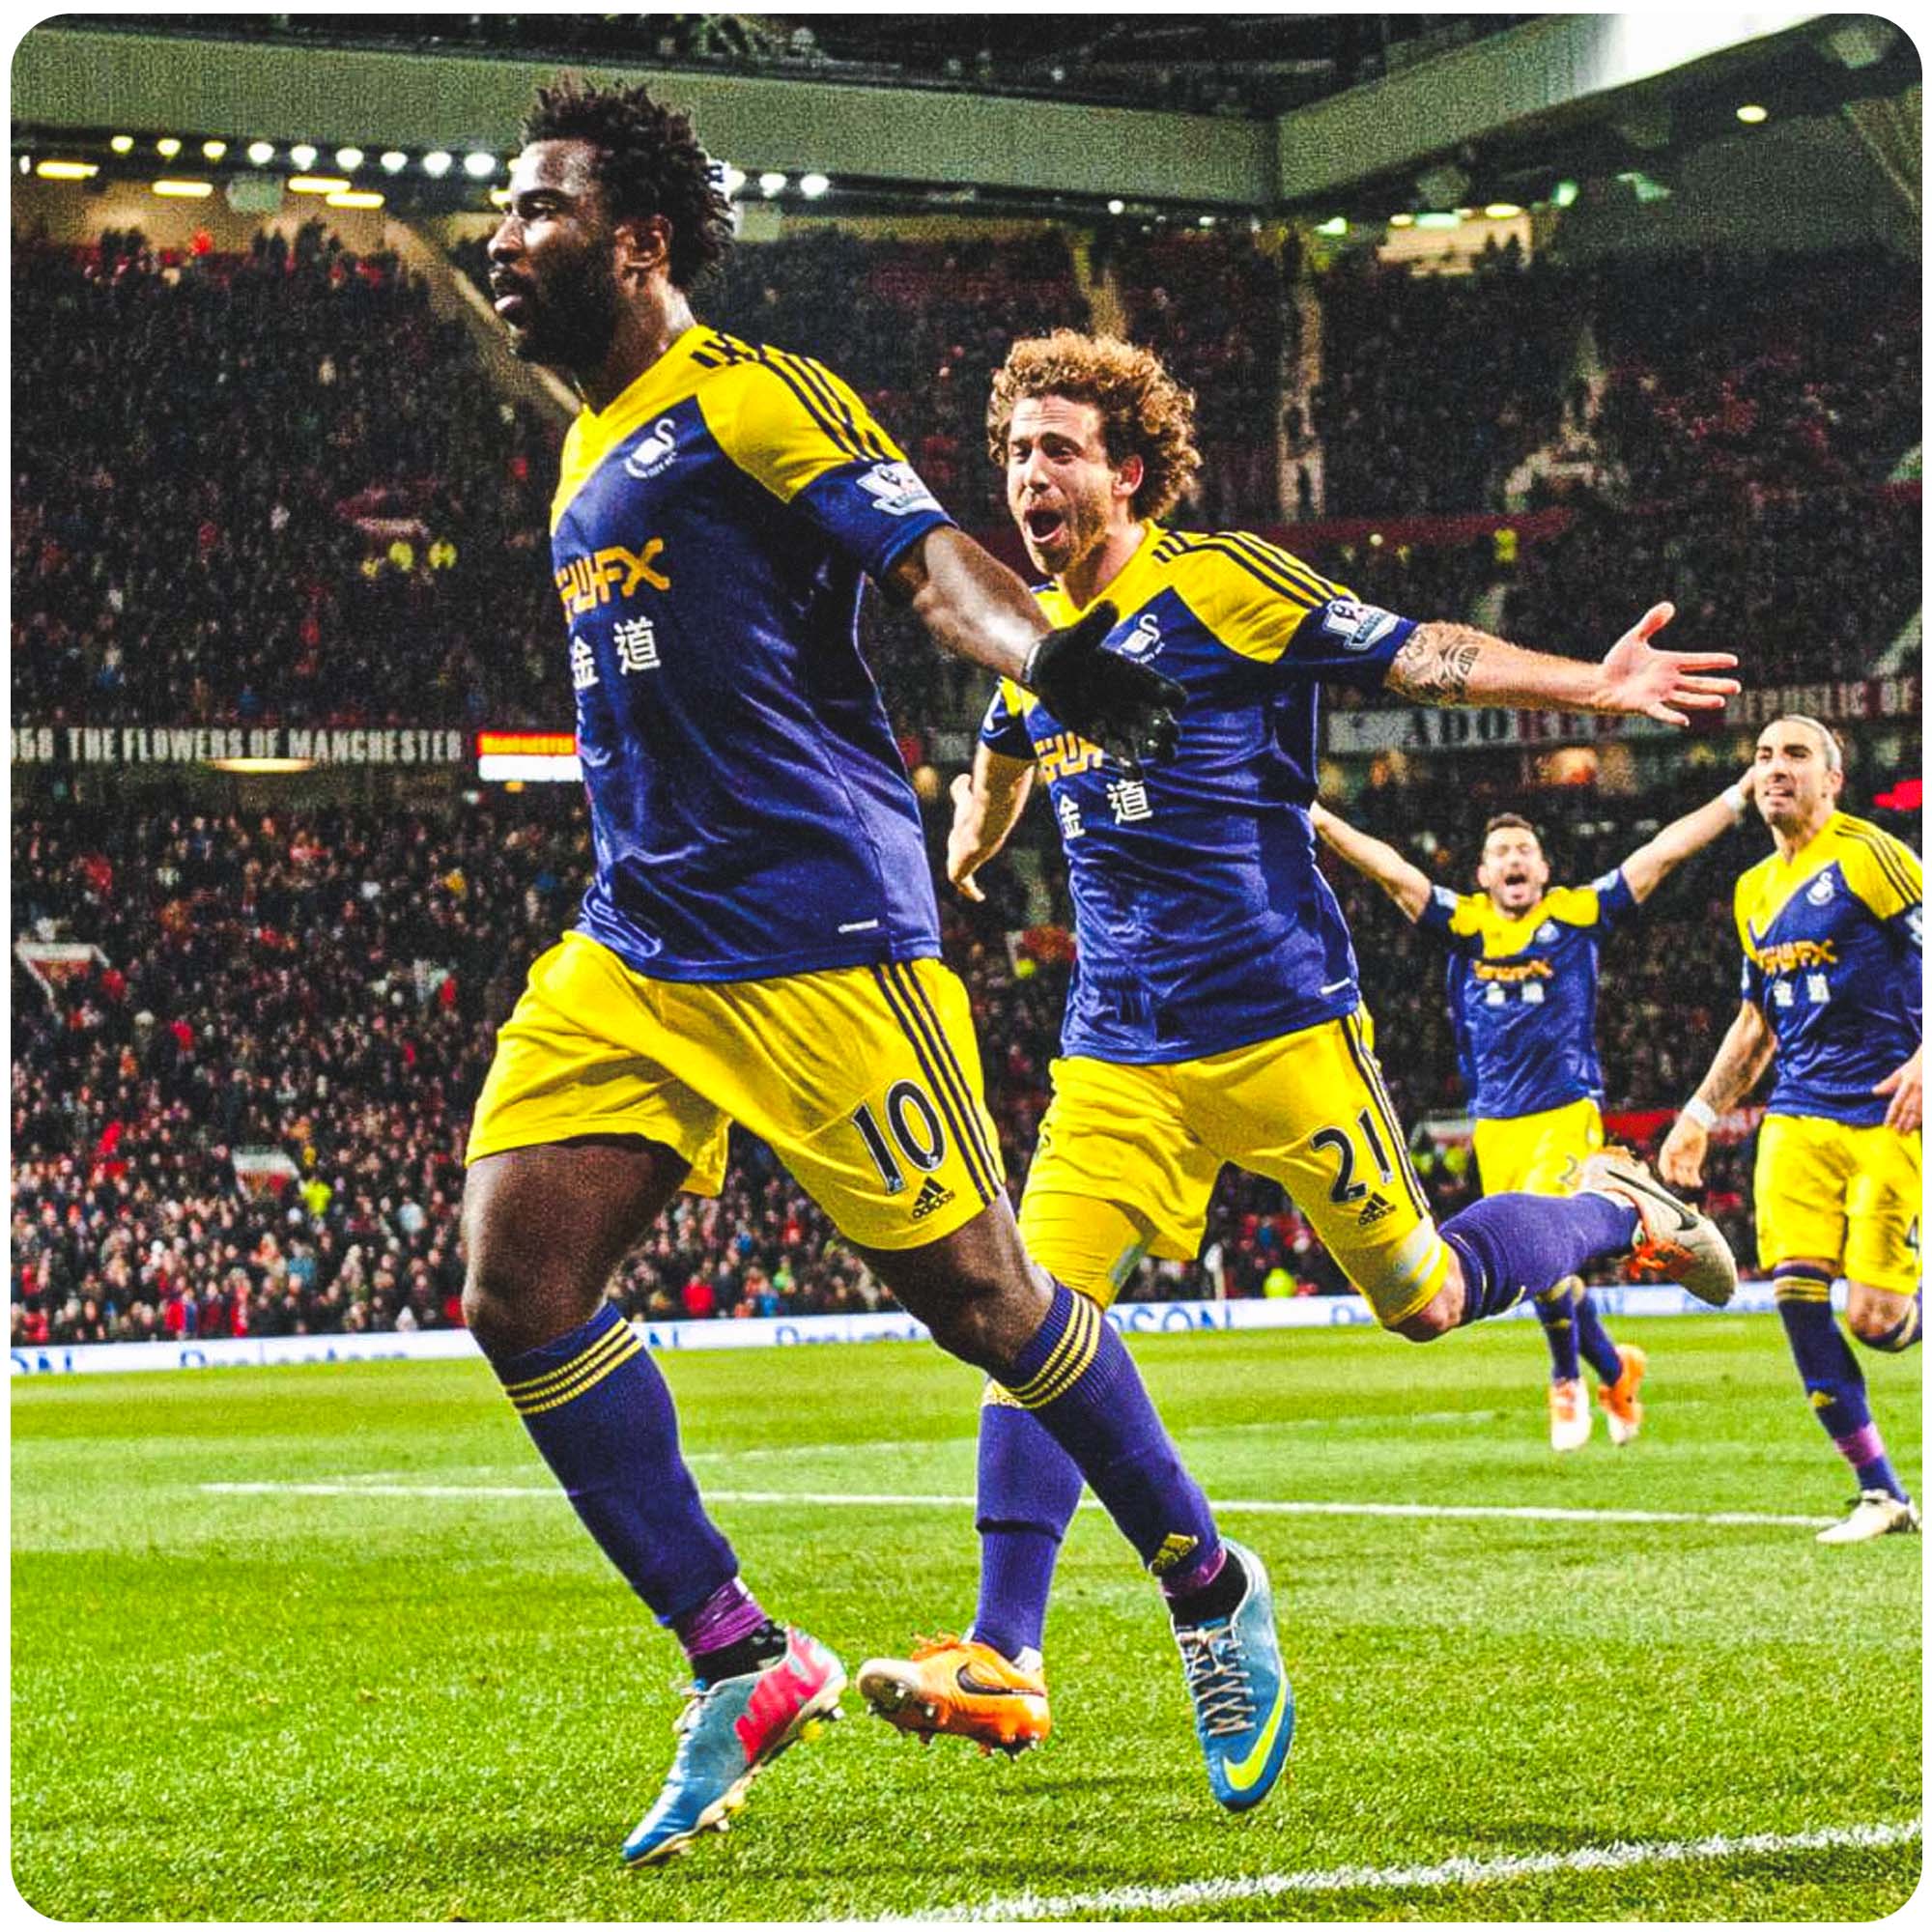 Photograph of Bony Celebrating his Goal at Old Trafford